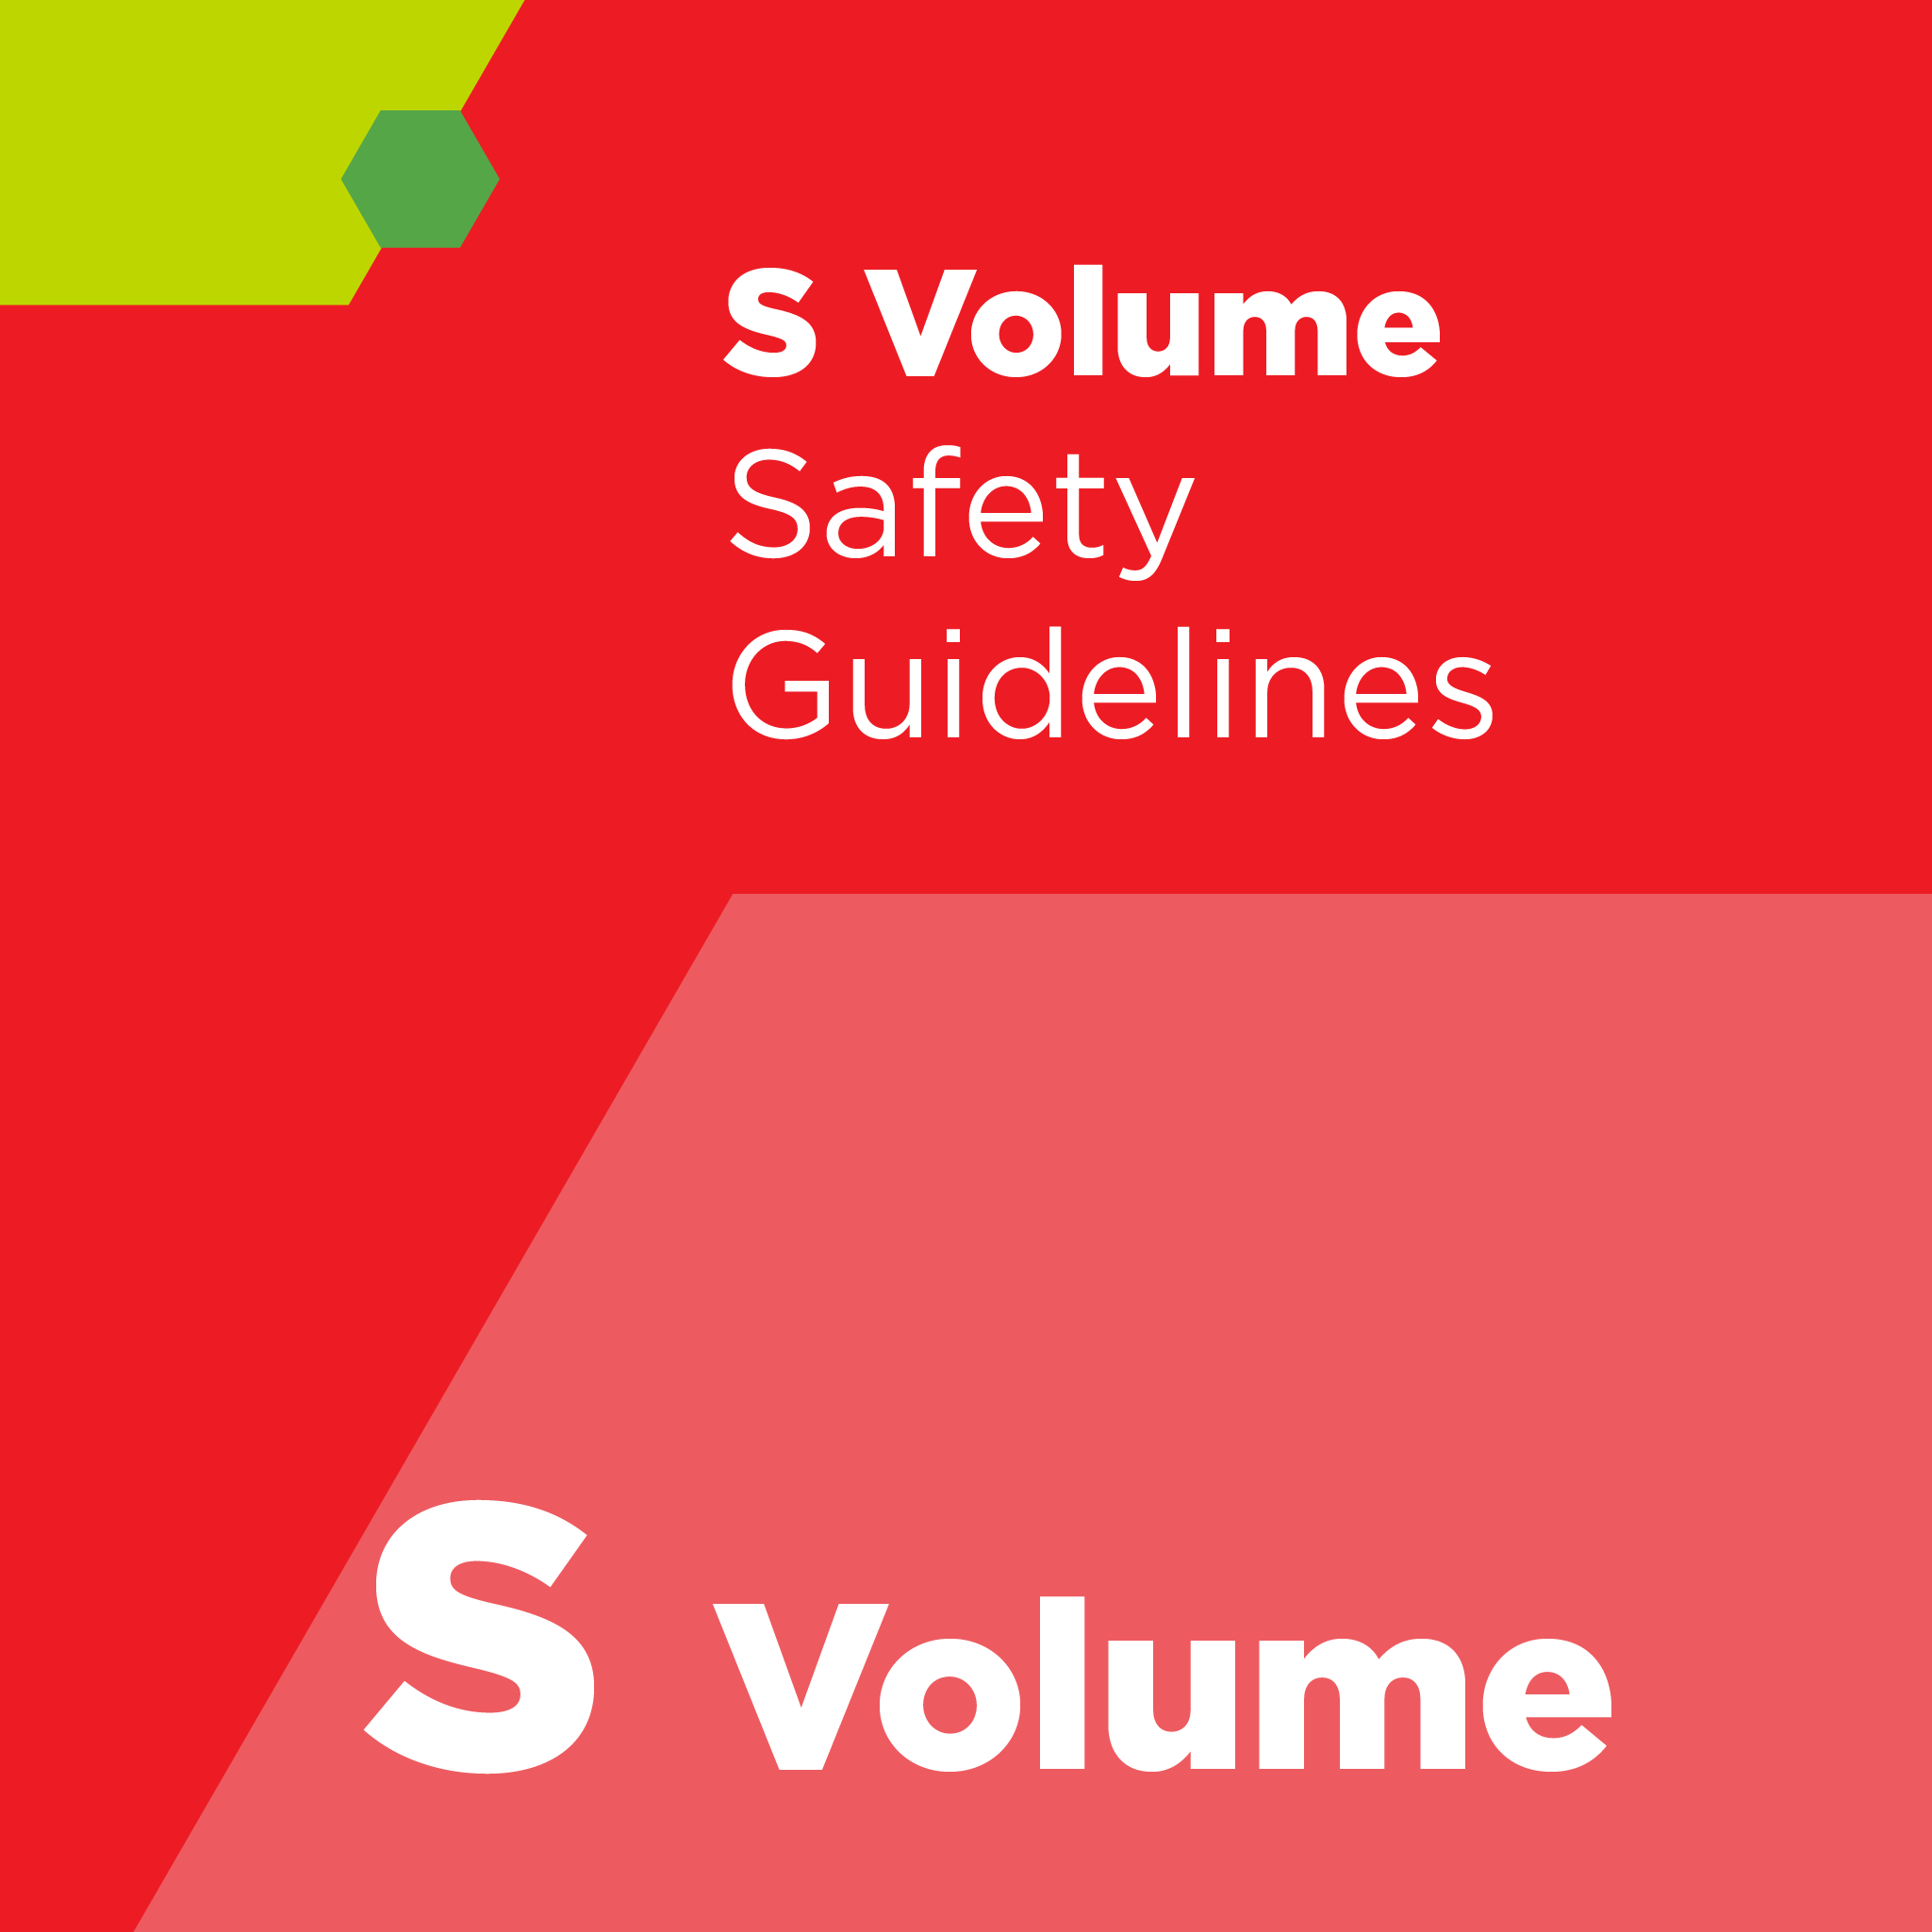 S02100 - SEMI S21 - Safety Guideline for Worker Protection